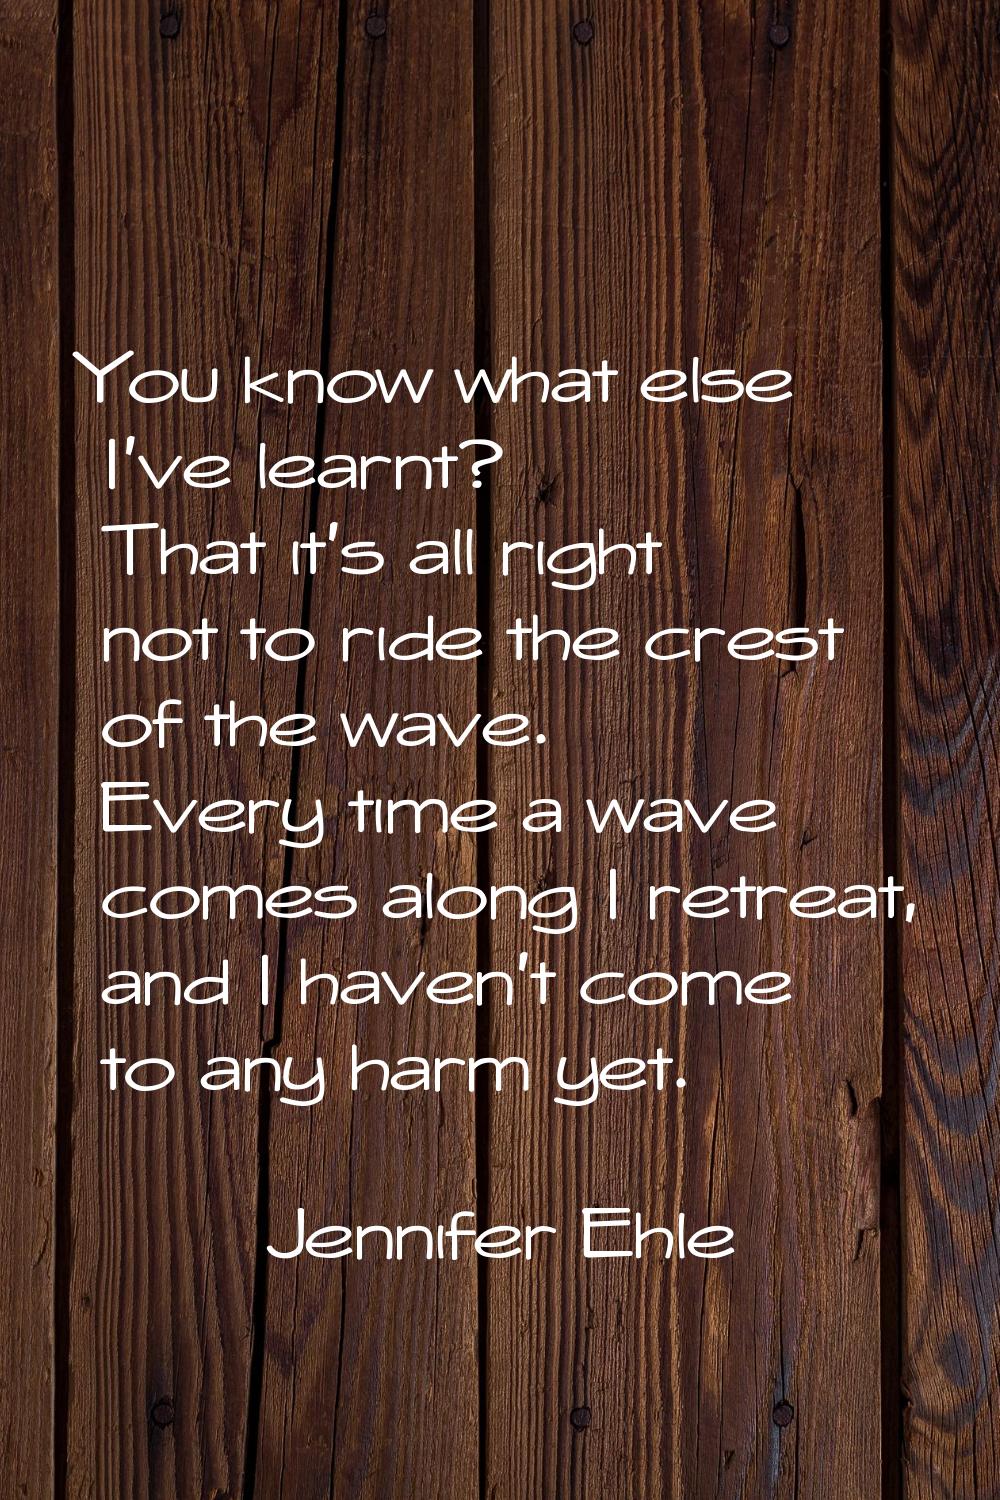 You know what else I've learnt? That it's all right not to ride the crest of the wave. Every time a